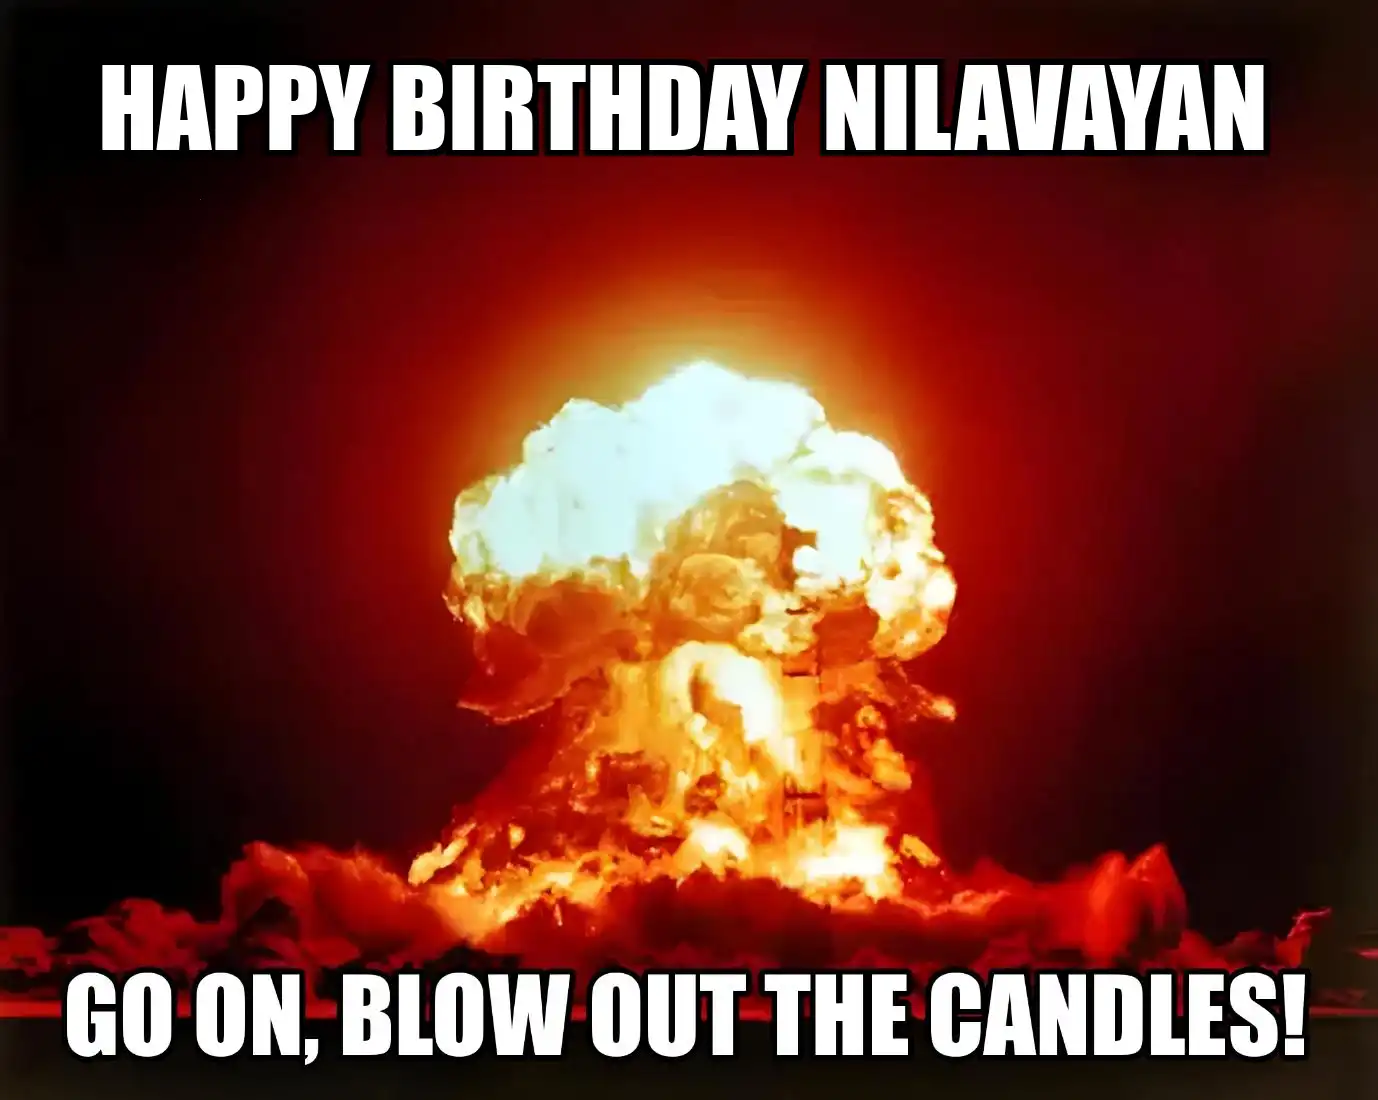 Happy Birthday Nilavayan Go On Blow Out The Candles Meme